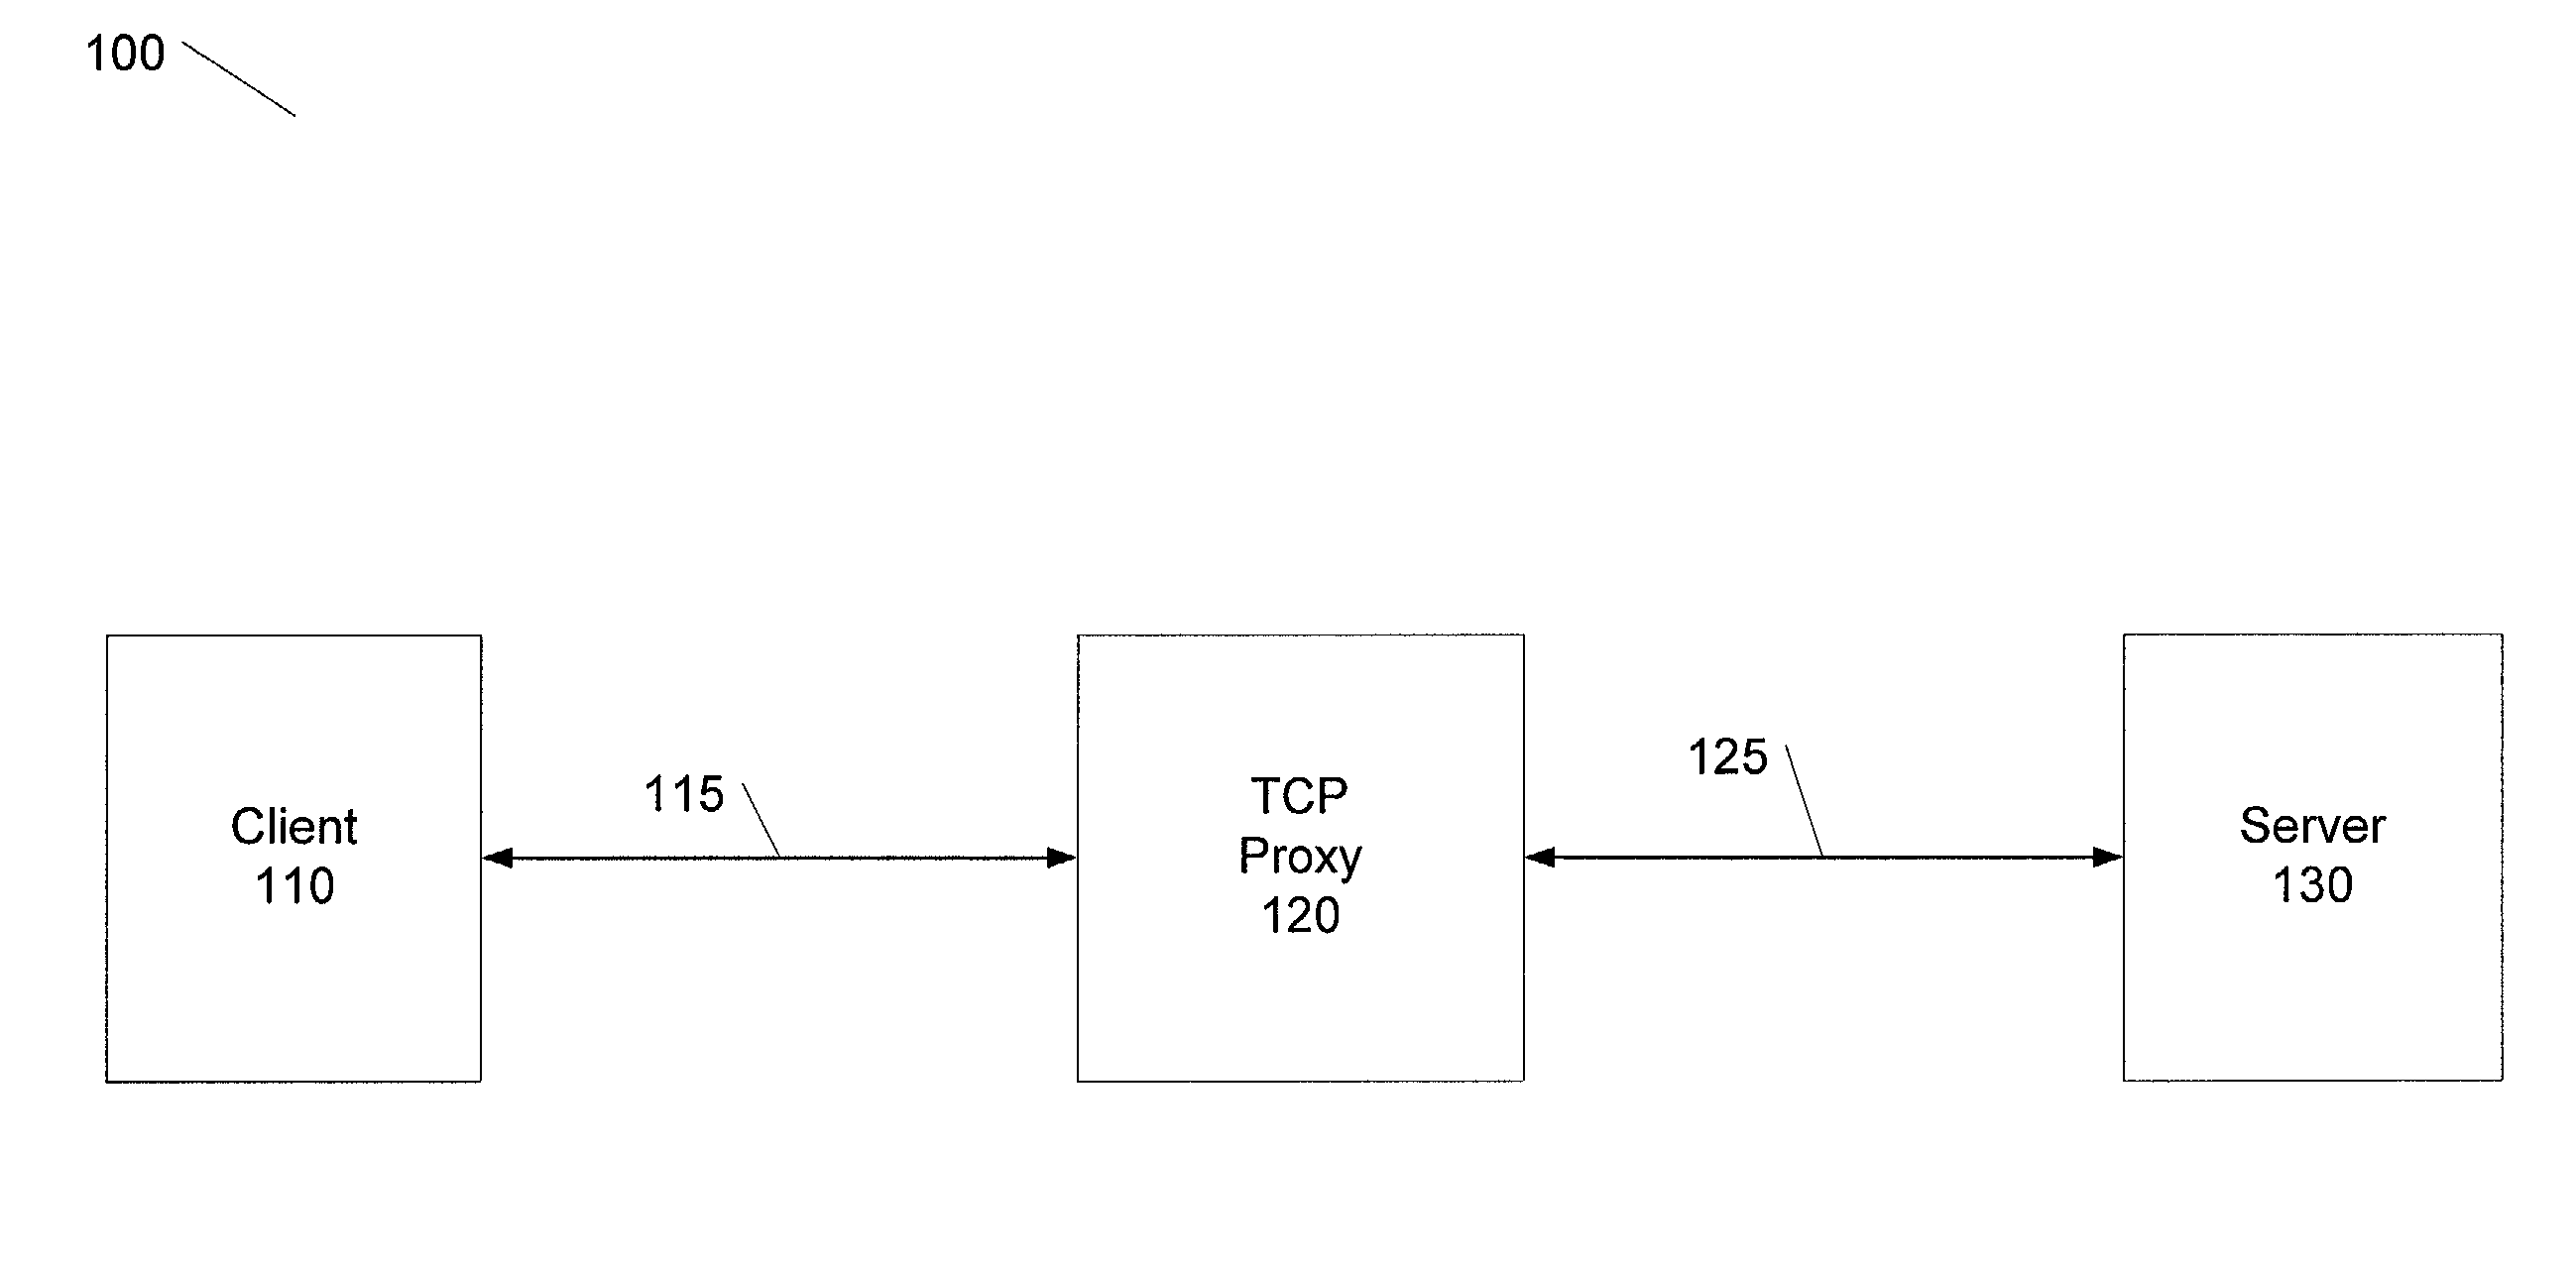 TCP proxy connection management in a gigabit environment